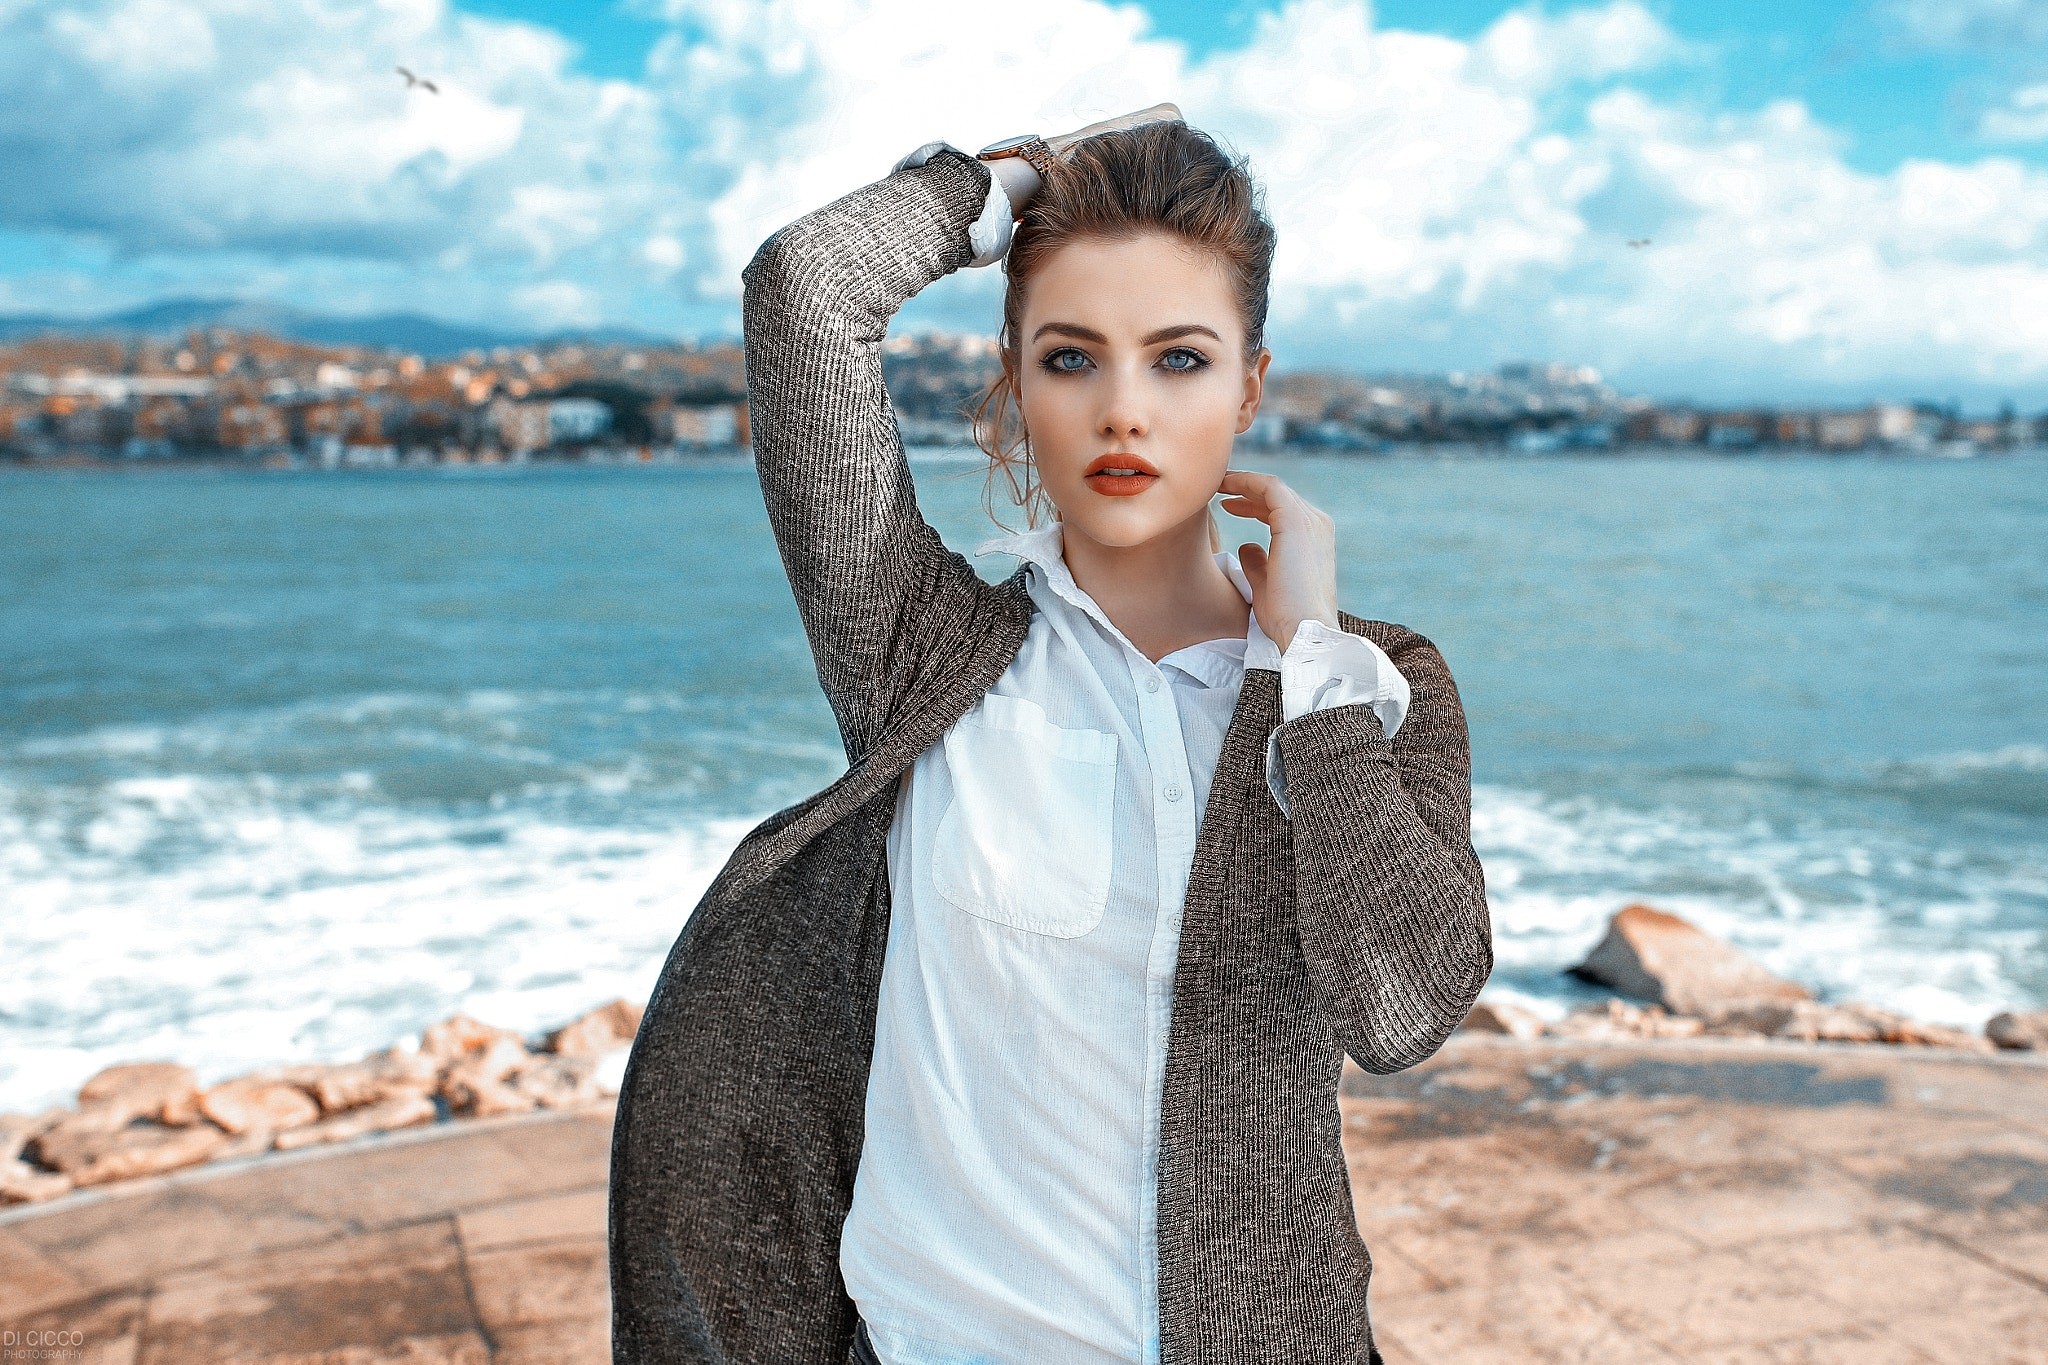 People 2048x1365 women brunette blue eyes sea waves women outdoors portrait open sweater white shirt juicy lips coast face windy Alessandro Di Cicco April Slough arms up